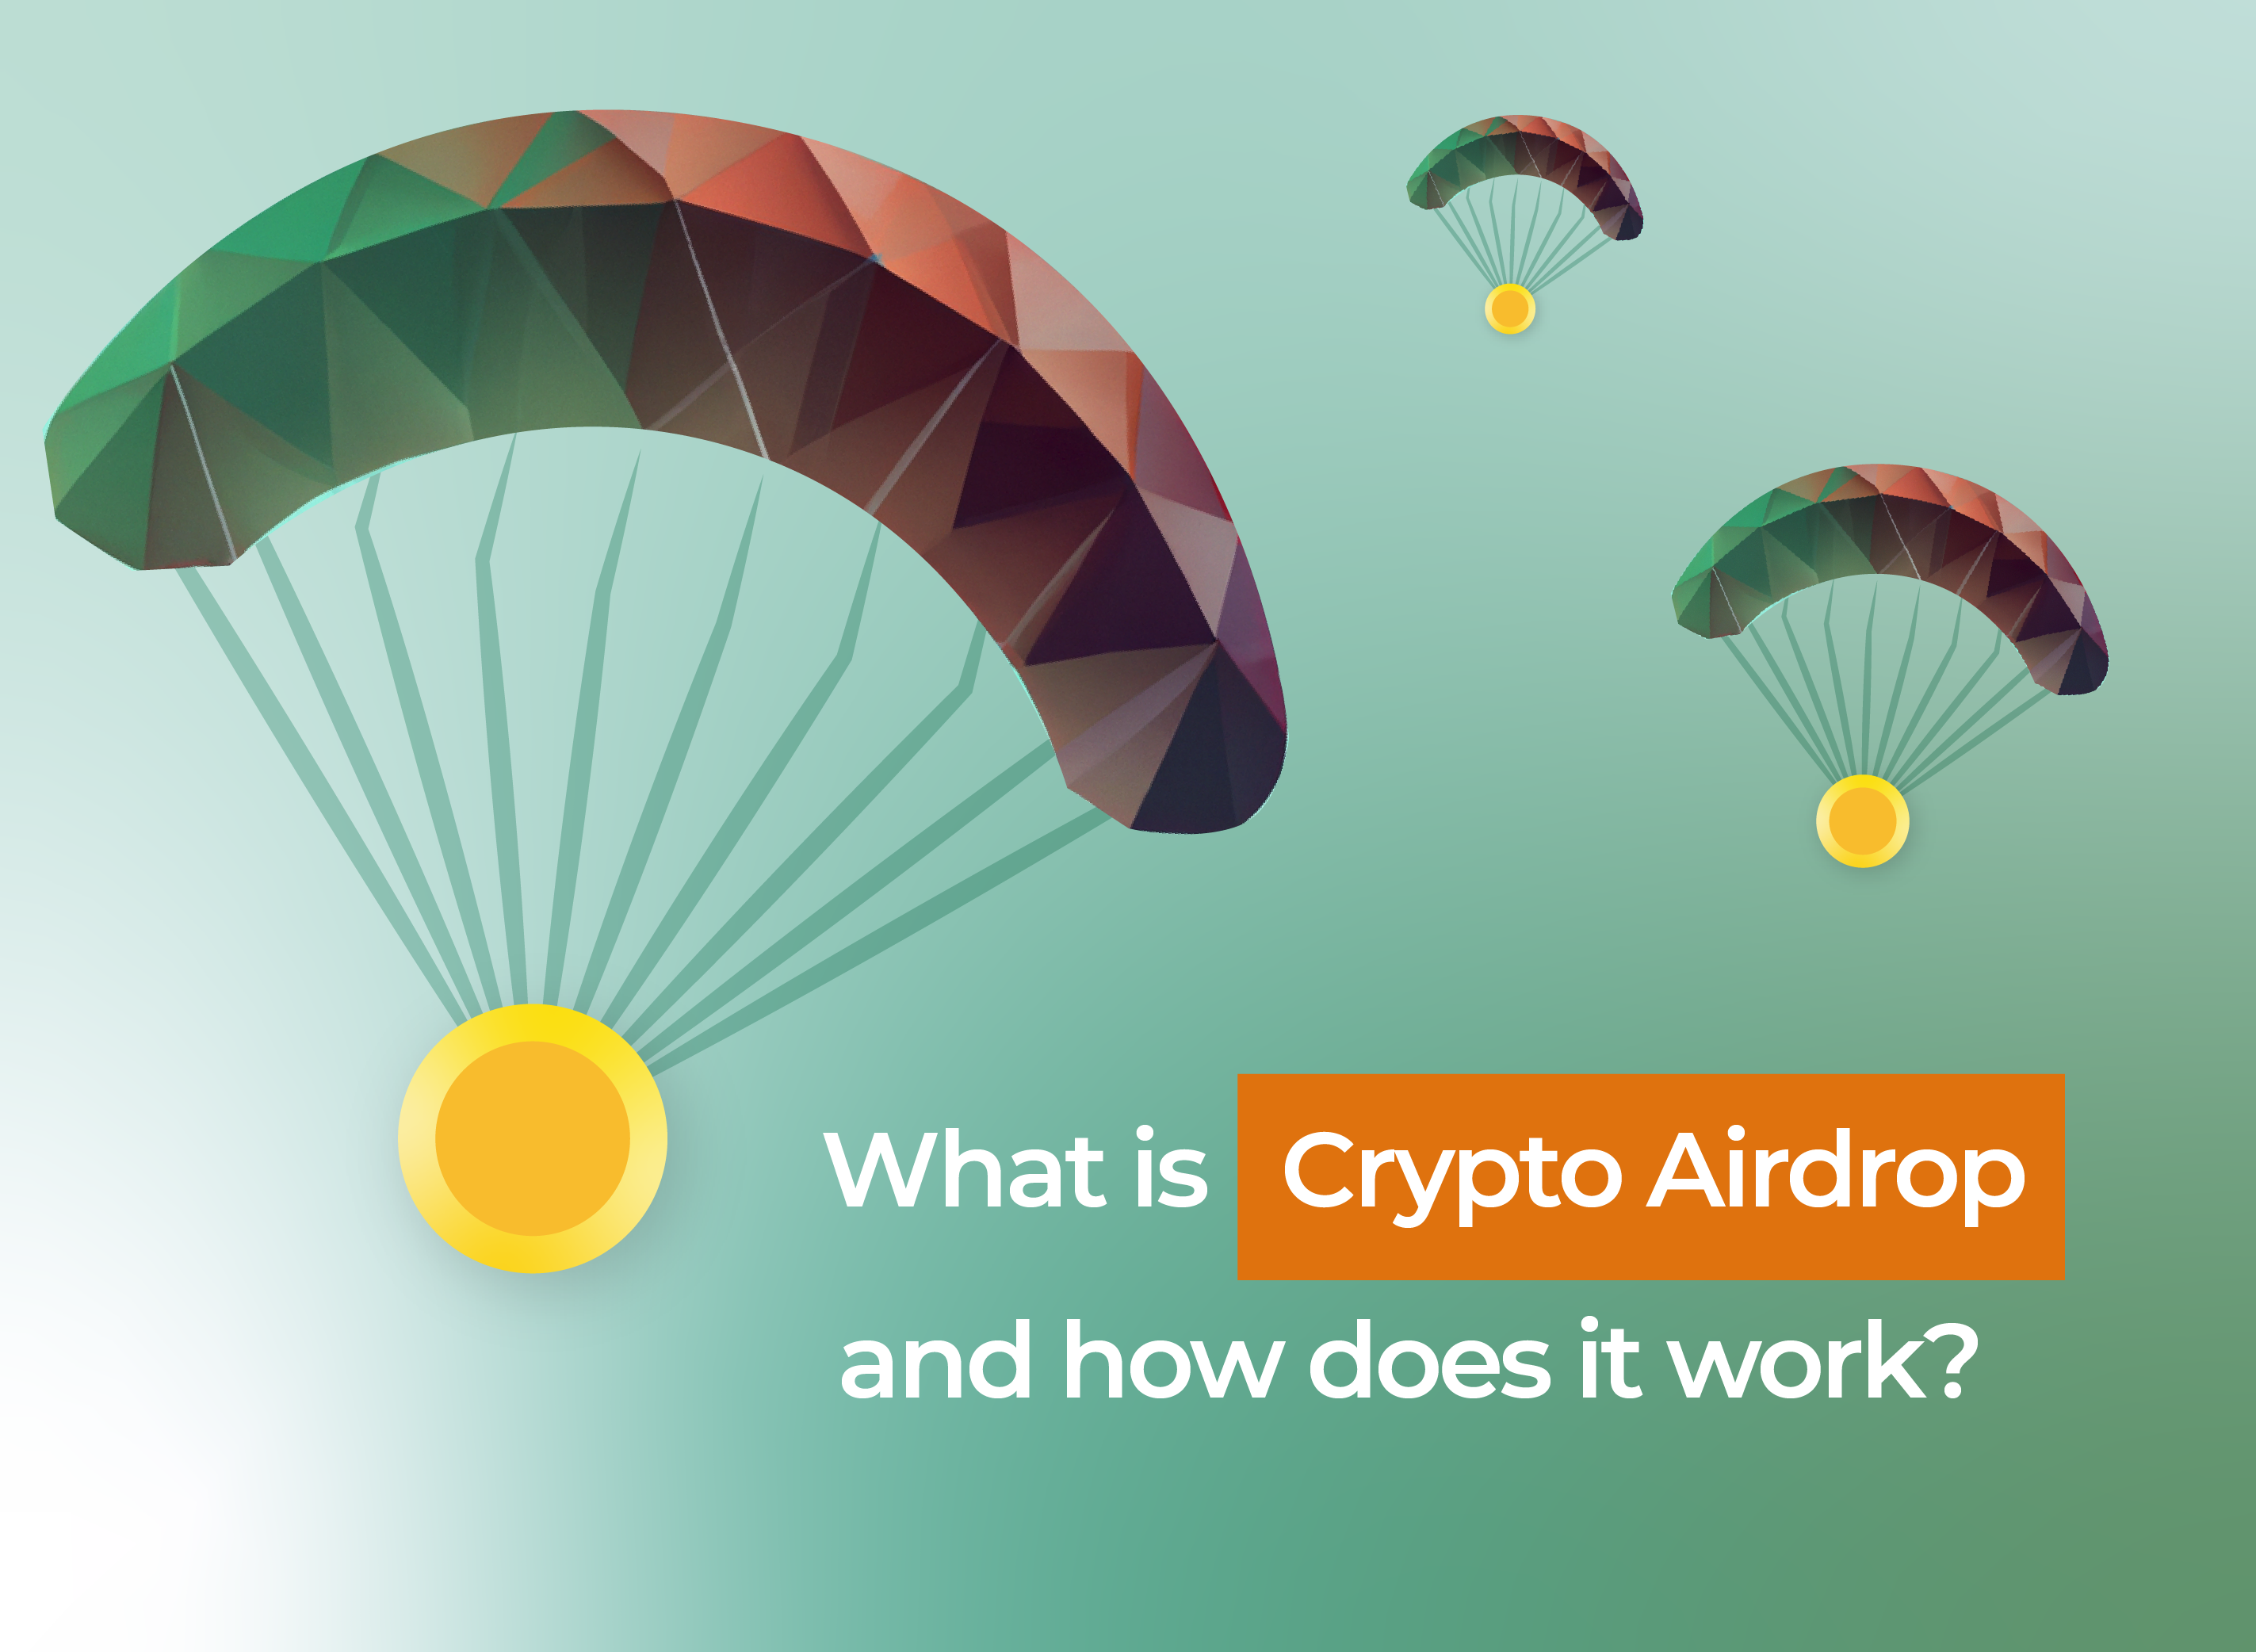 What Is a Crypto Airdrop?